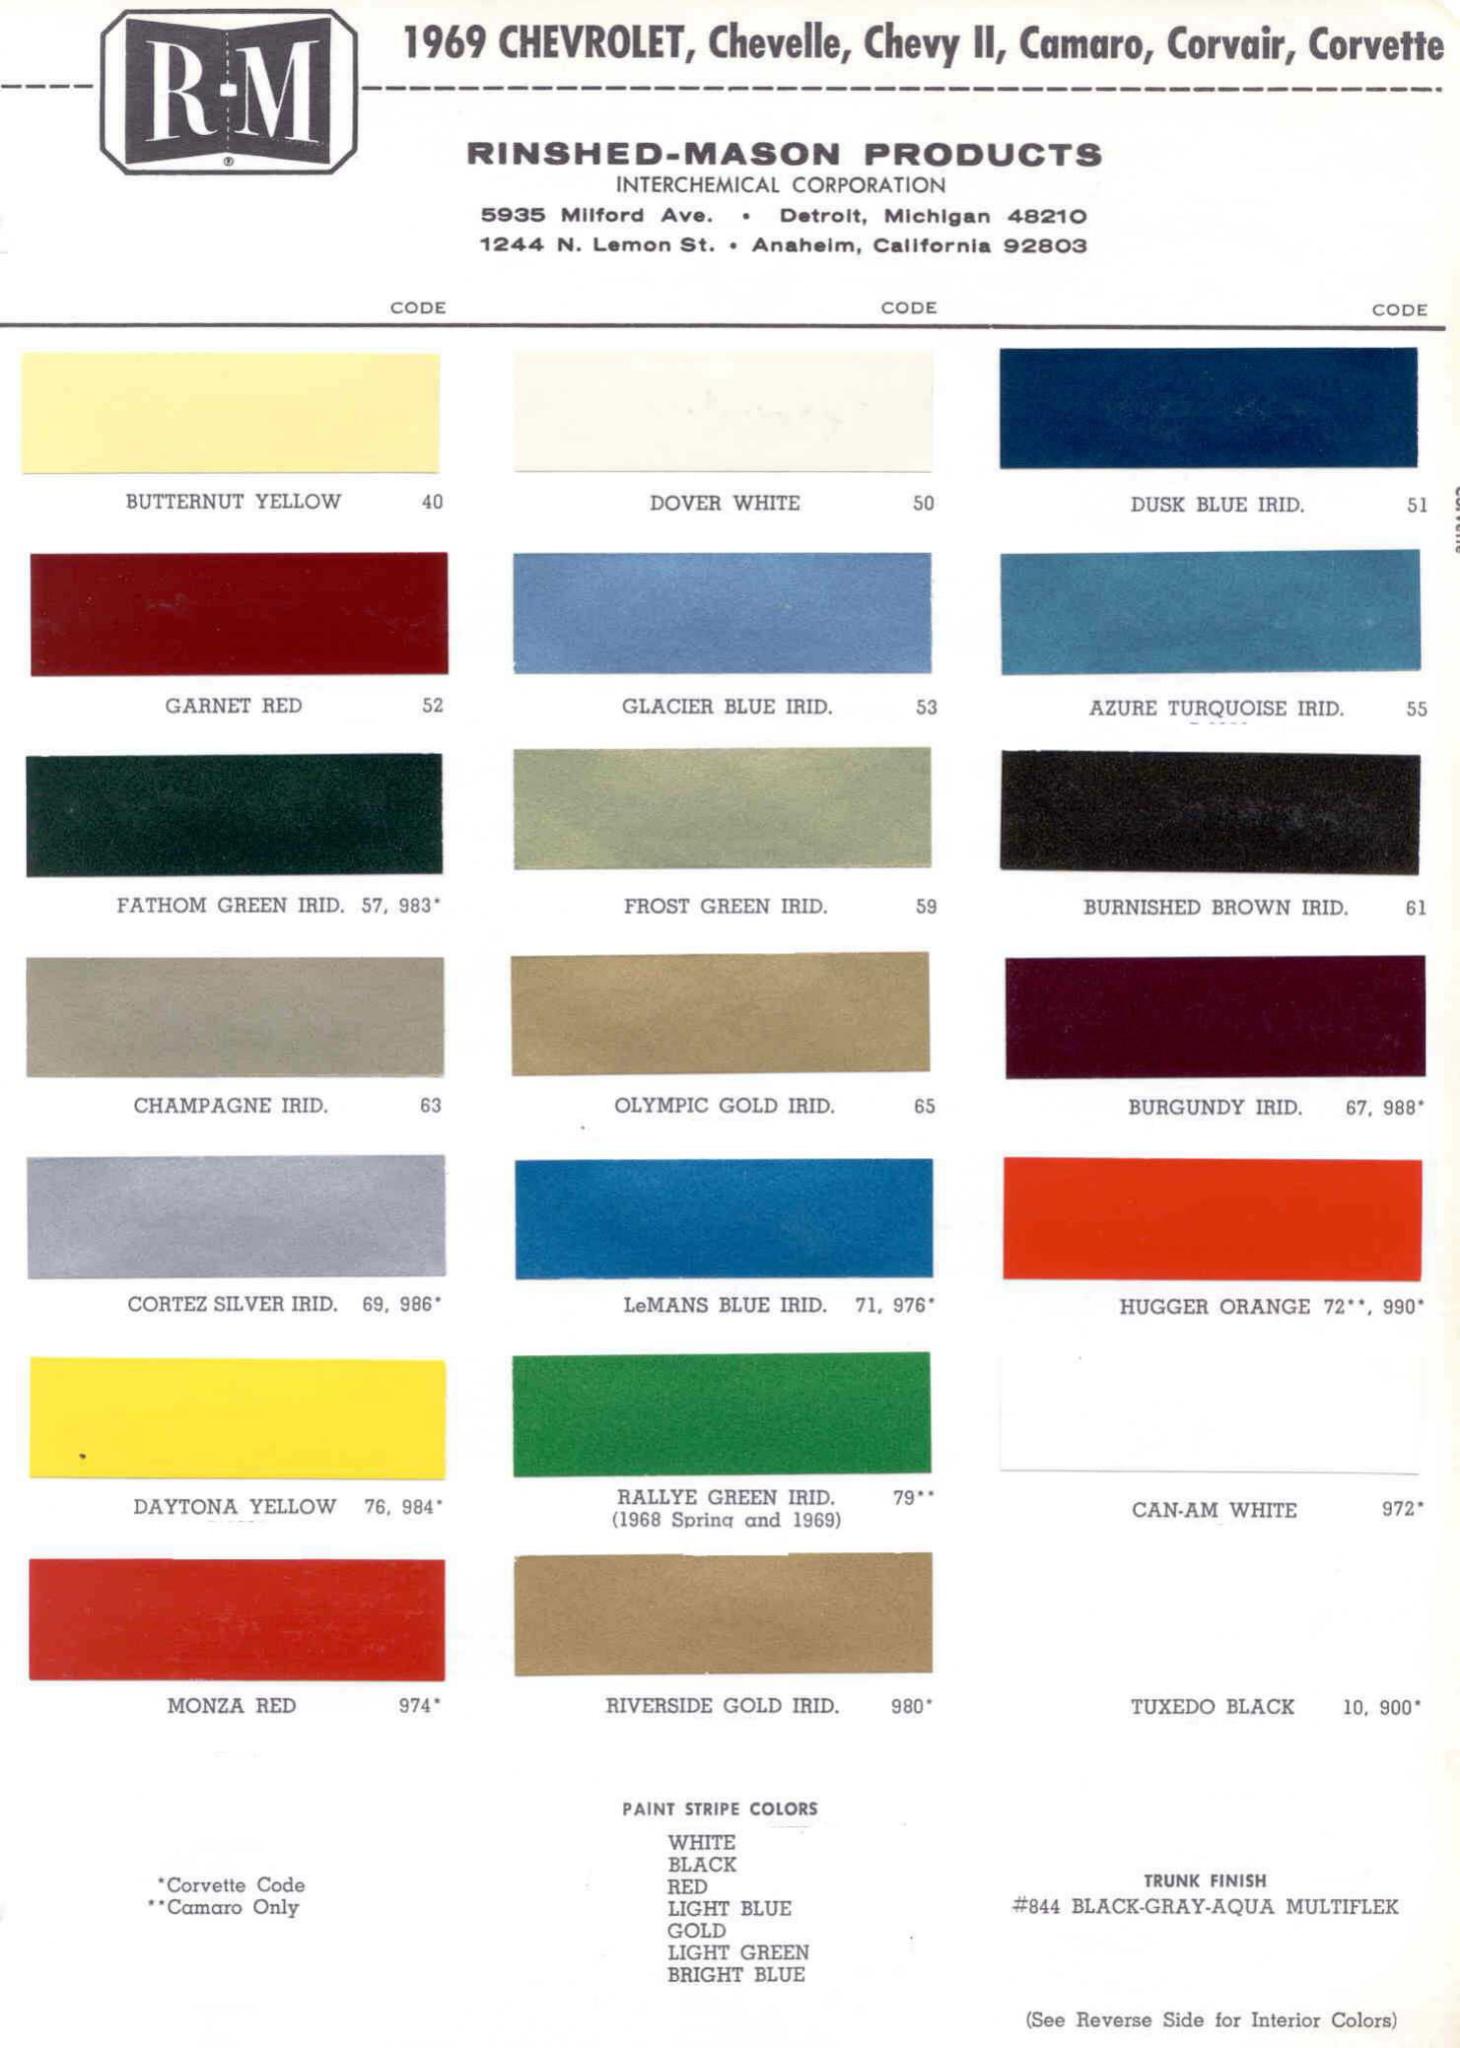 1969 General Motors GM Paint Codes and color examples